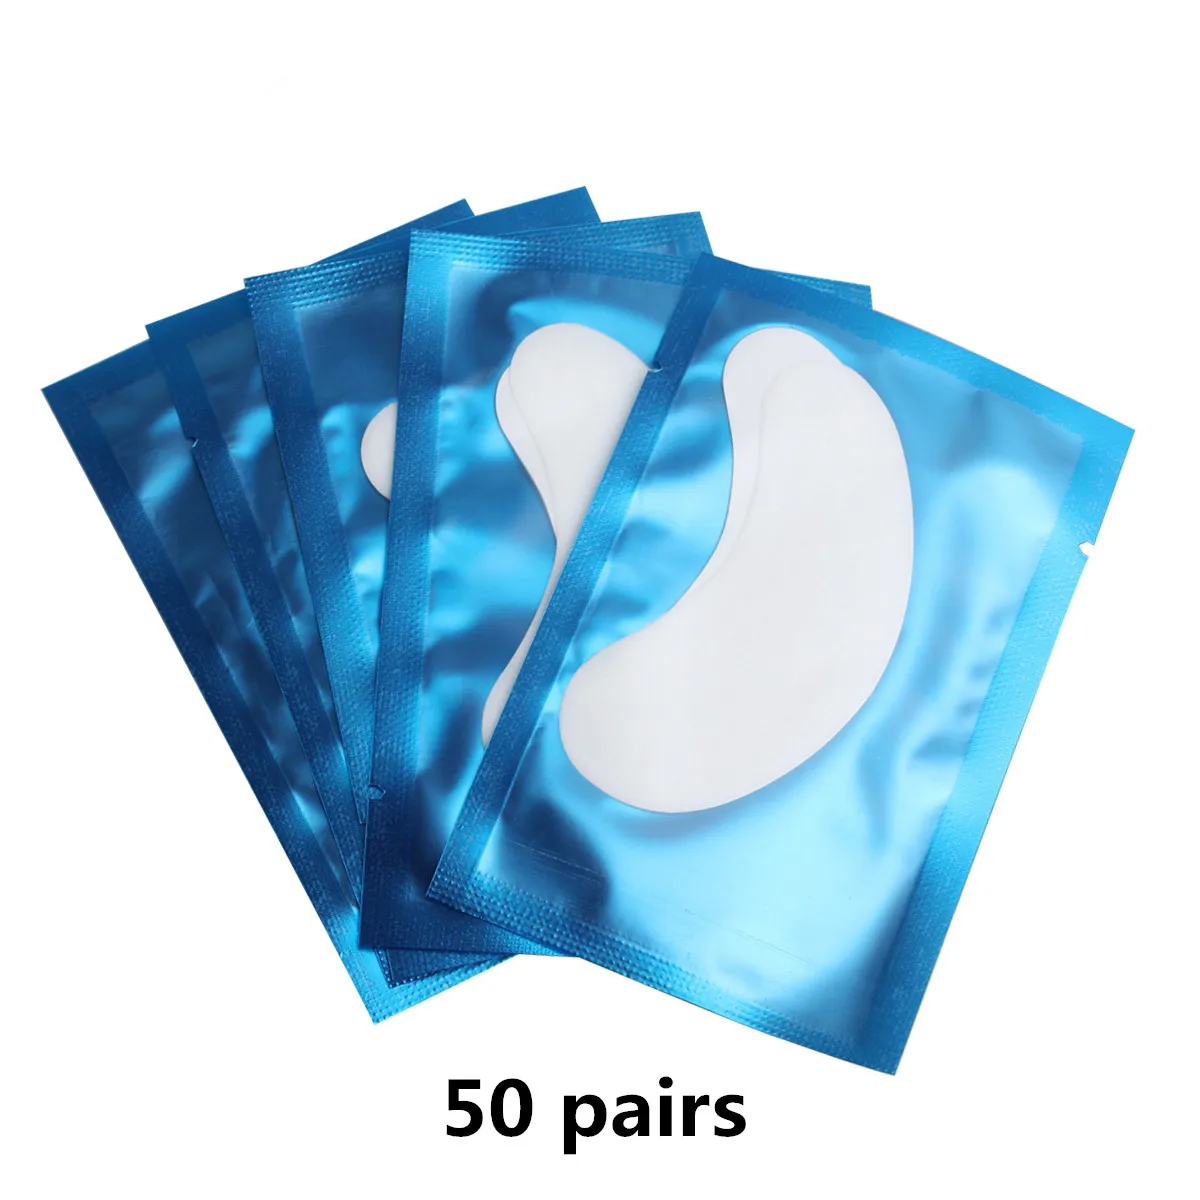 50/100 Pairs Eye Patch Lashes Extension Paper Patches Under Eye Pads Lash Extension Paper Patches Eye Tips Sticker Wraps Tools - Цвет: 50blue